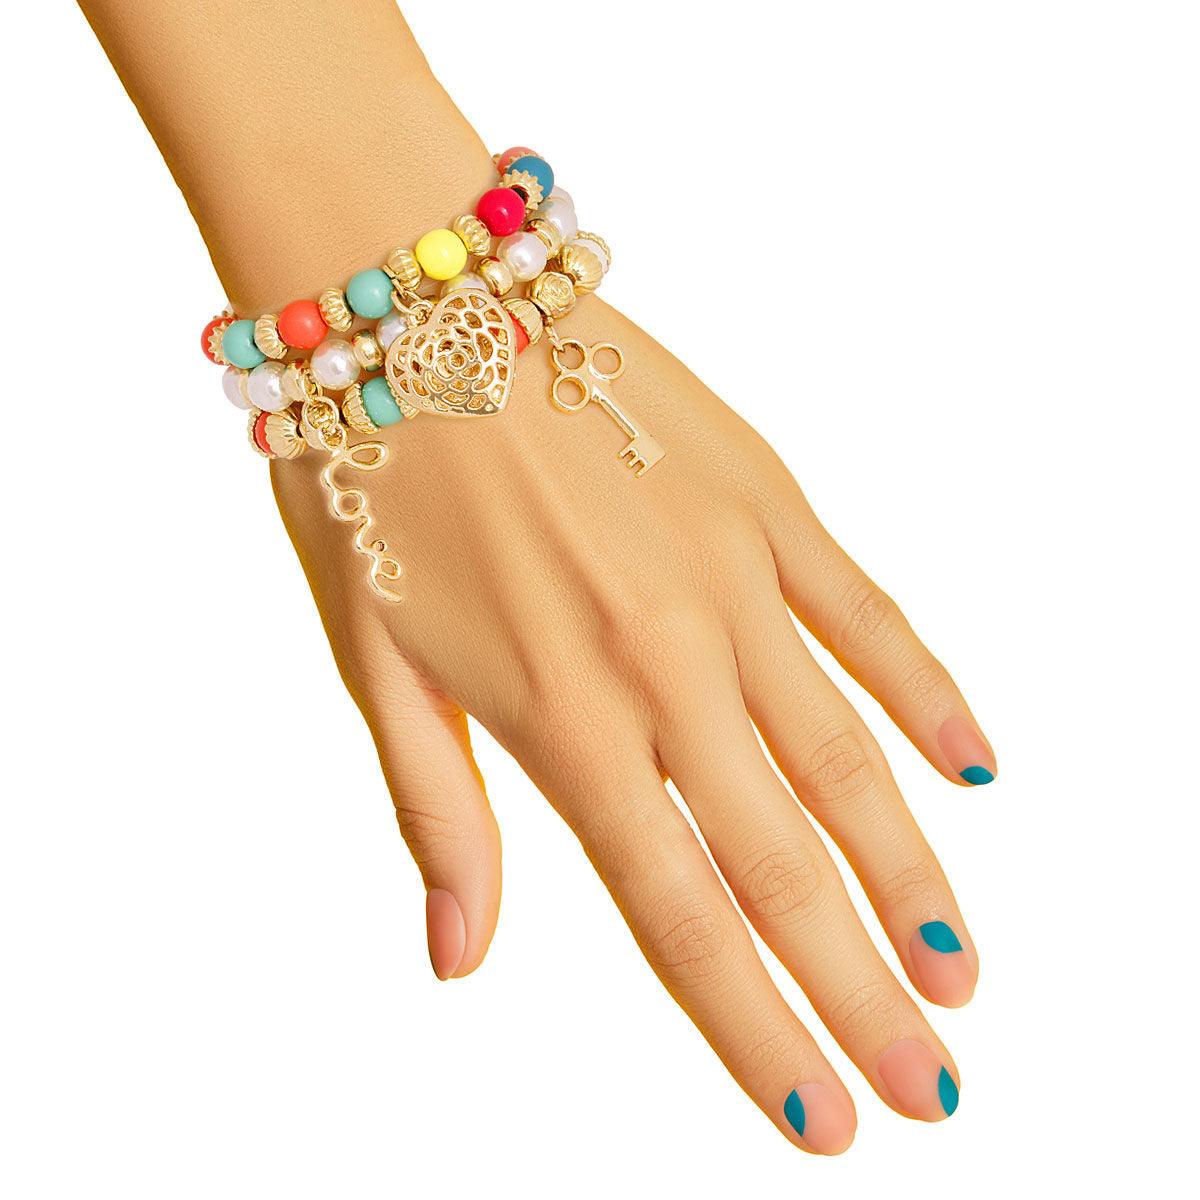 Fiesta Palette Charms & Beaded Bracelet Set: Add Color to Your Style